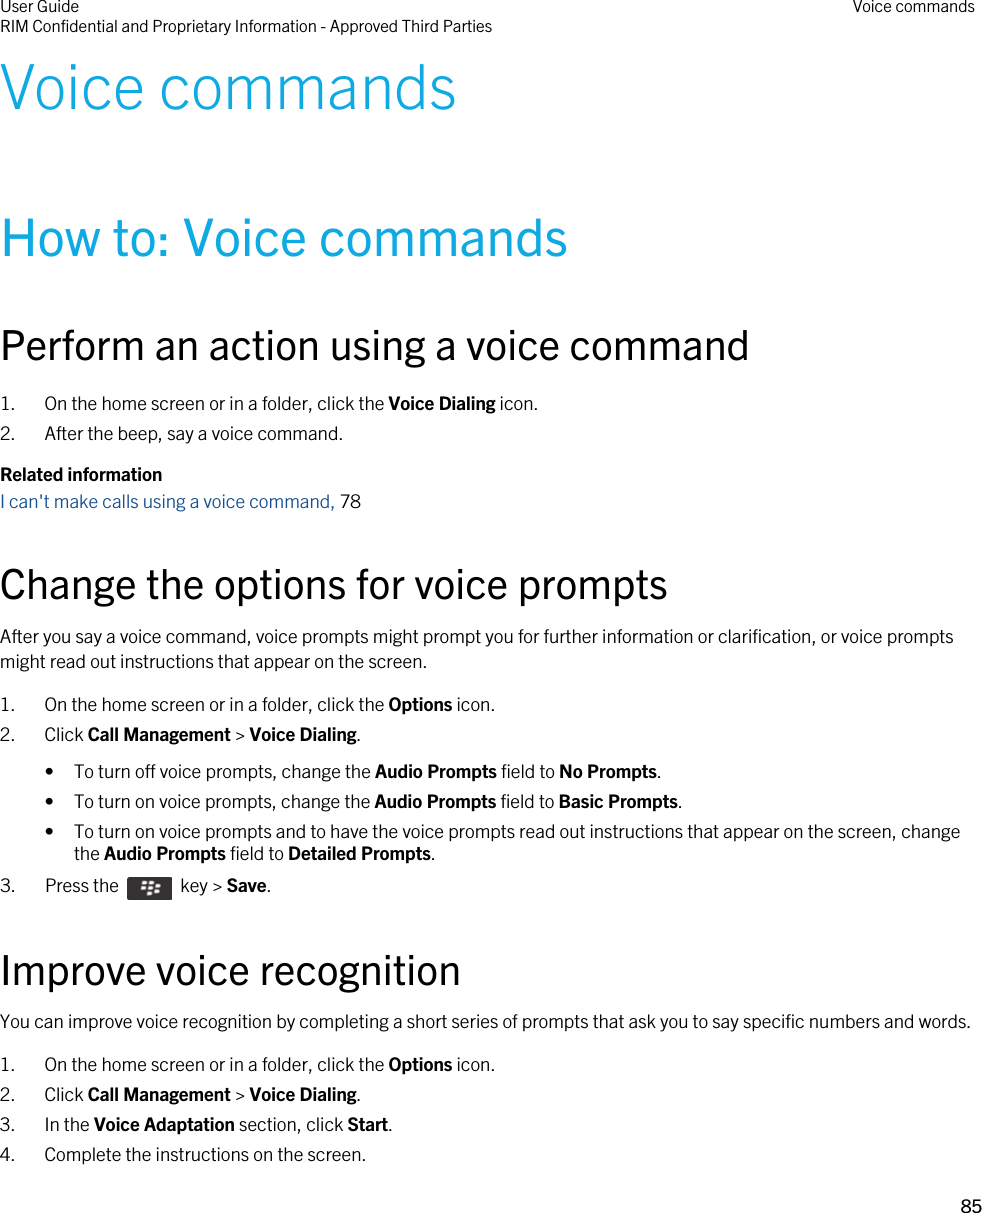 Voice commandsHow to: Voice commandsPerform an action using a voice command1. On the home screen or in a folder, click the Voice Dialing icon.2. After the beep, say a voice command.Related informationI can&apos;t make calls using a voice command, 78 Change the options for voice promptsAfter you say a voice command, voice prompts might prompt you for further information or clarification, or voice prompts might read out instructions that appear on the screen.1. On the home screen or in a folder, click the Options icon.2. Click Call Management &gt; Voice Dialing.• To turn off voice prompts, change the Audio Prompts field to No Prompts.• To turn on voice prompts, change the Audio Prompts field to Basic Prompts.• To turn on voice prompts and to have the voice prompts read out instructions that appear on the screen, change the Audio Prompts field to Detailed Prompts.3.  Press the    key &gt; Save. Improve voice recognitionYou can improve voice recognition by completing a short series of prompts that ask you to say specific numbers and words.1. On the home screen or in a folder, click the Options icon.2. Click Call Management &gt; Voice Dialing.3. In the Voice Adaptation section, click Start.4. Complete the instructions on the screen.User GuideRIM Confidential and Proprietary Information - Approved Third Parties Voice commands85 